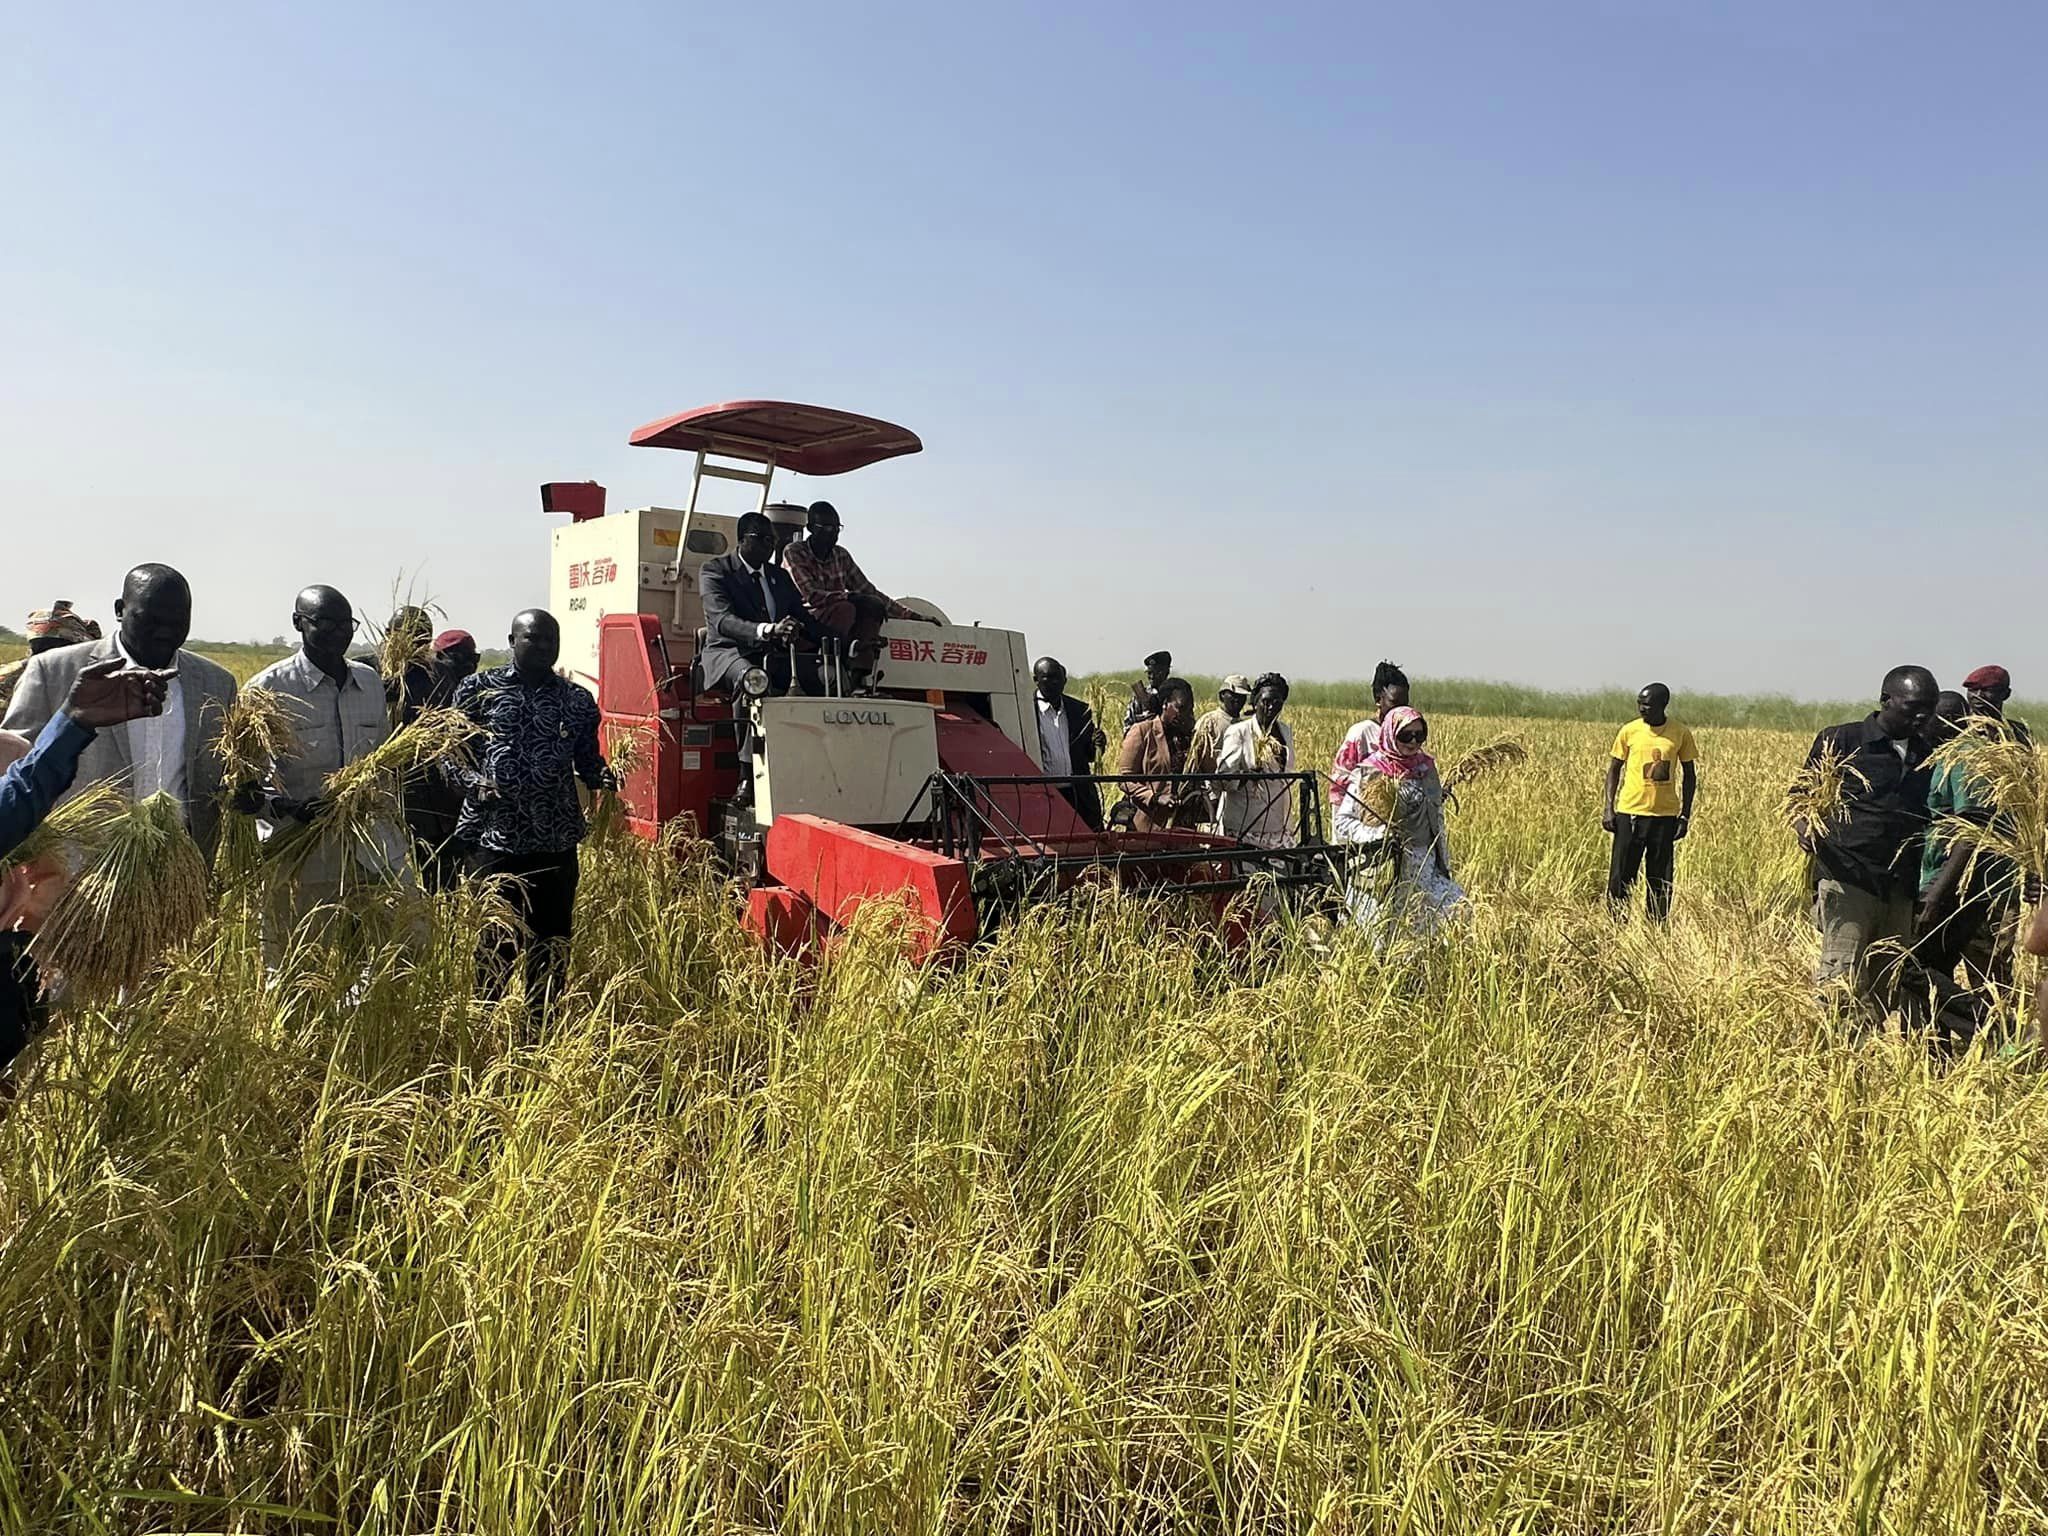 NBGs harvests 500-hectare of rice at Aweil Rice Scheme